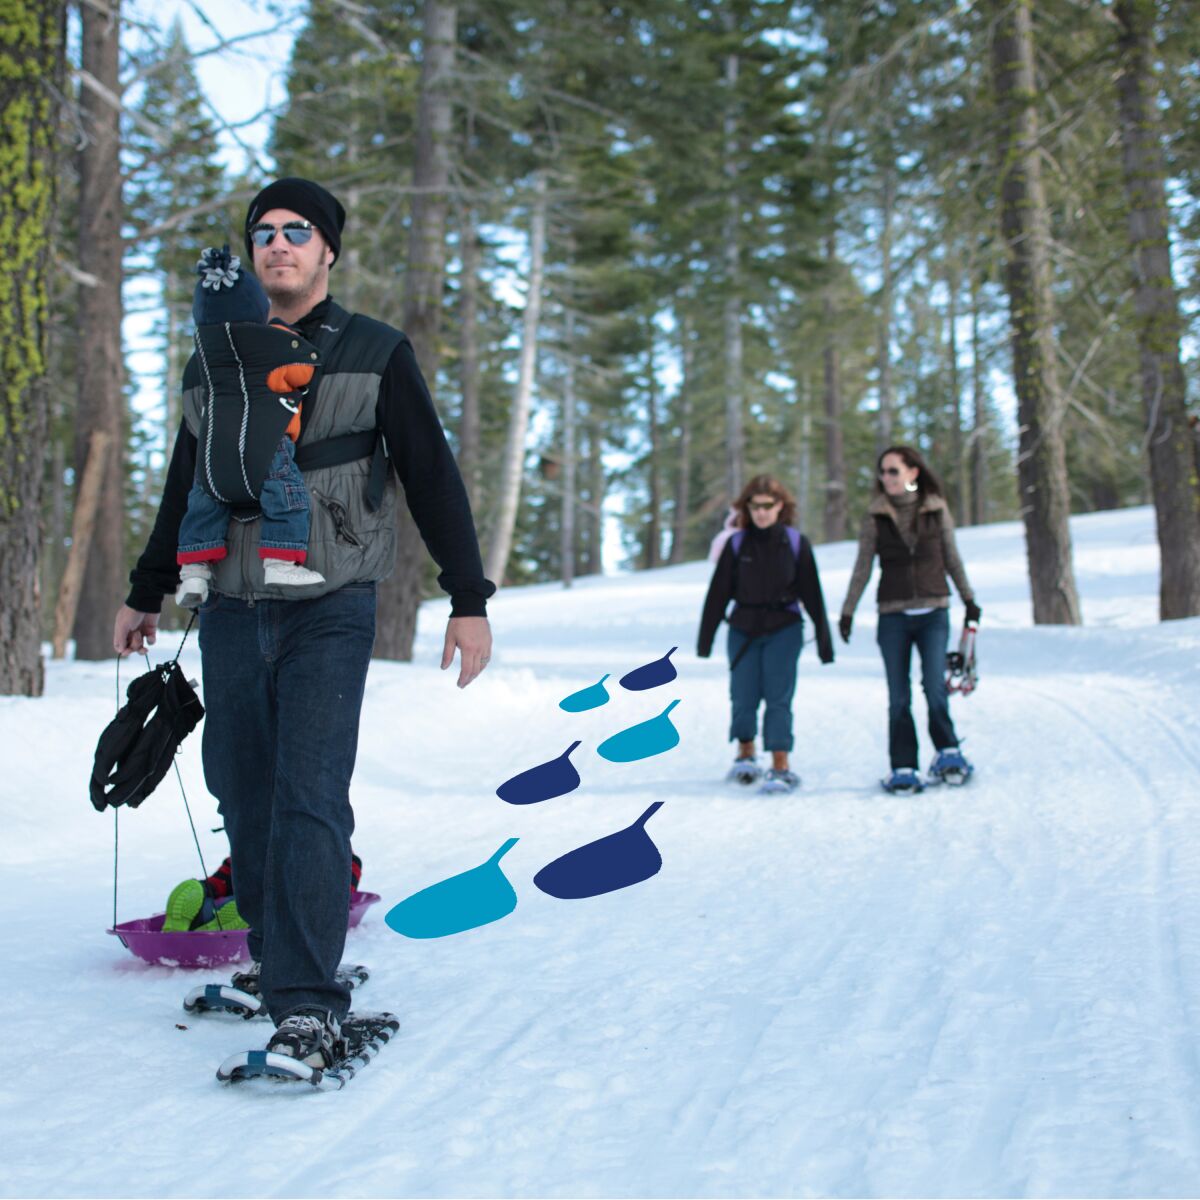 Snowshoeing isn't hard, but it can be a lot more aerobic than hiking.